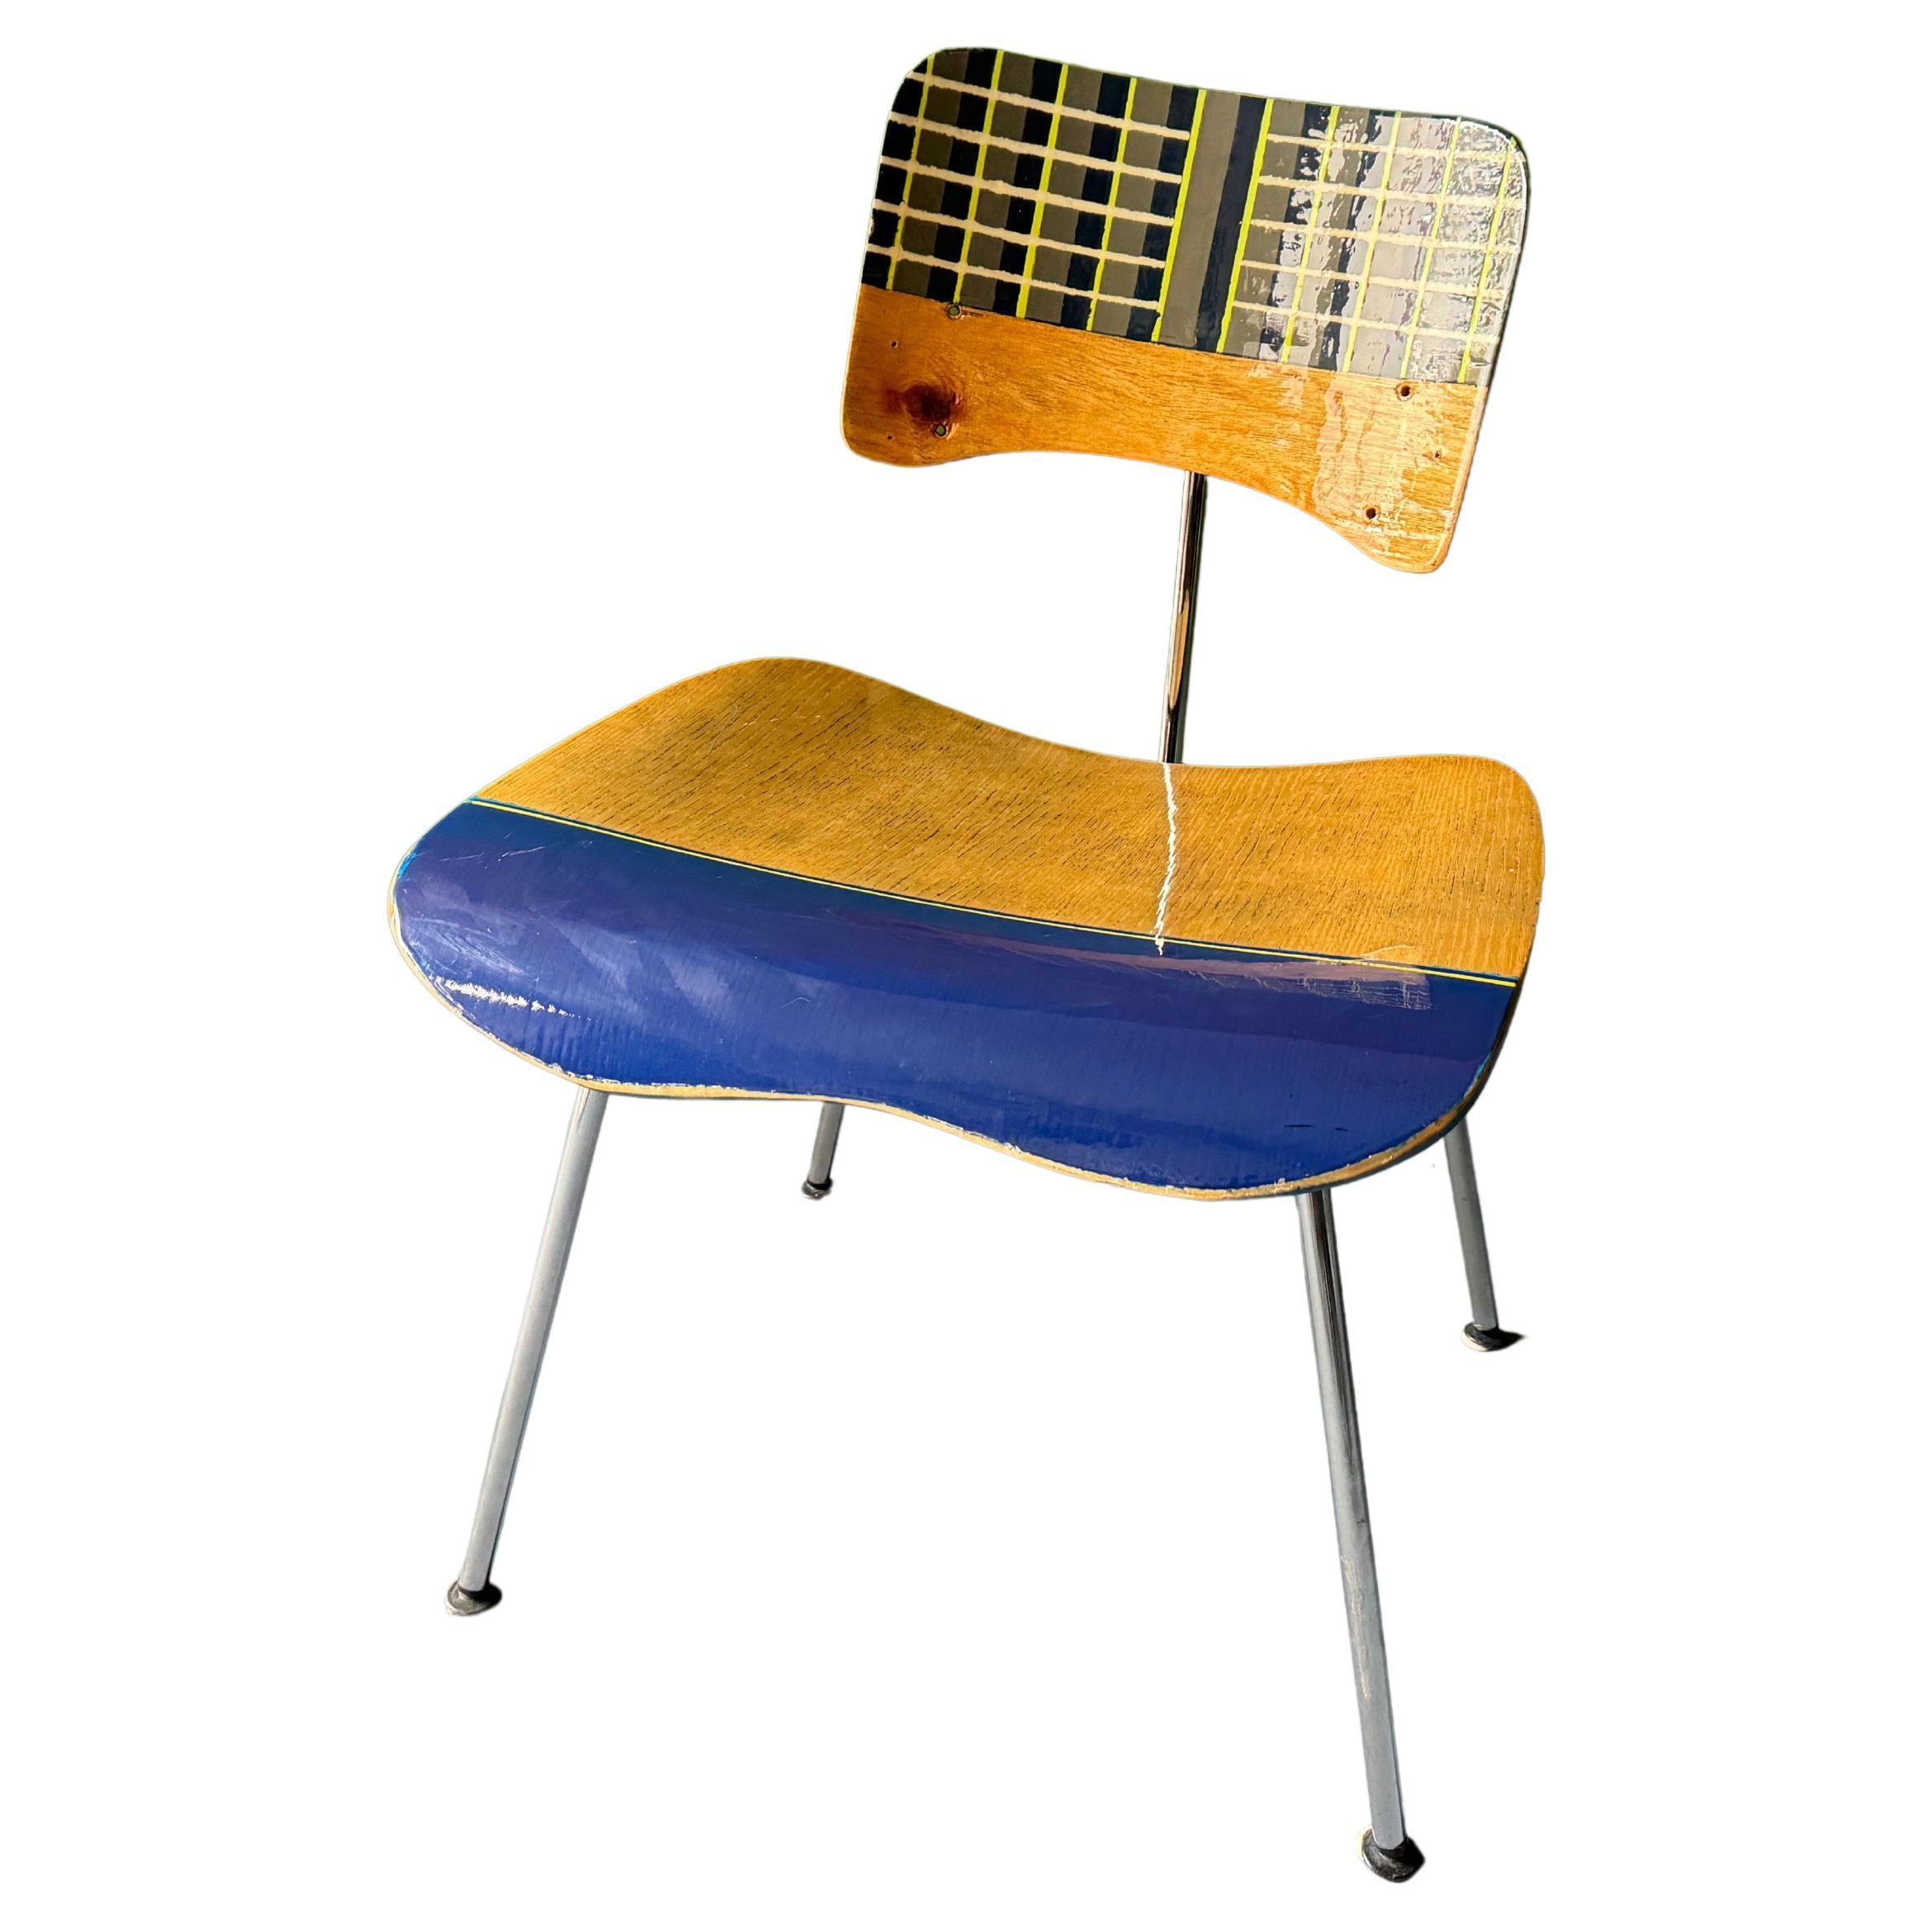 dcm chair contemporized by Markus Friedrich Staab For Sale